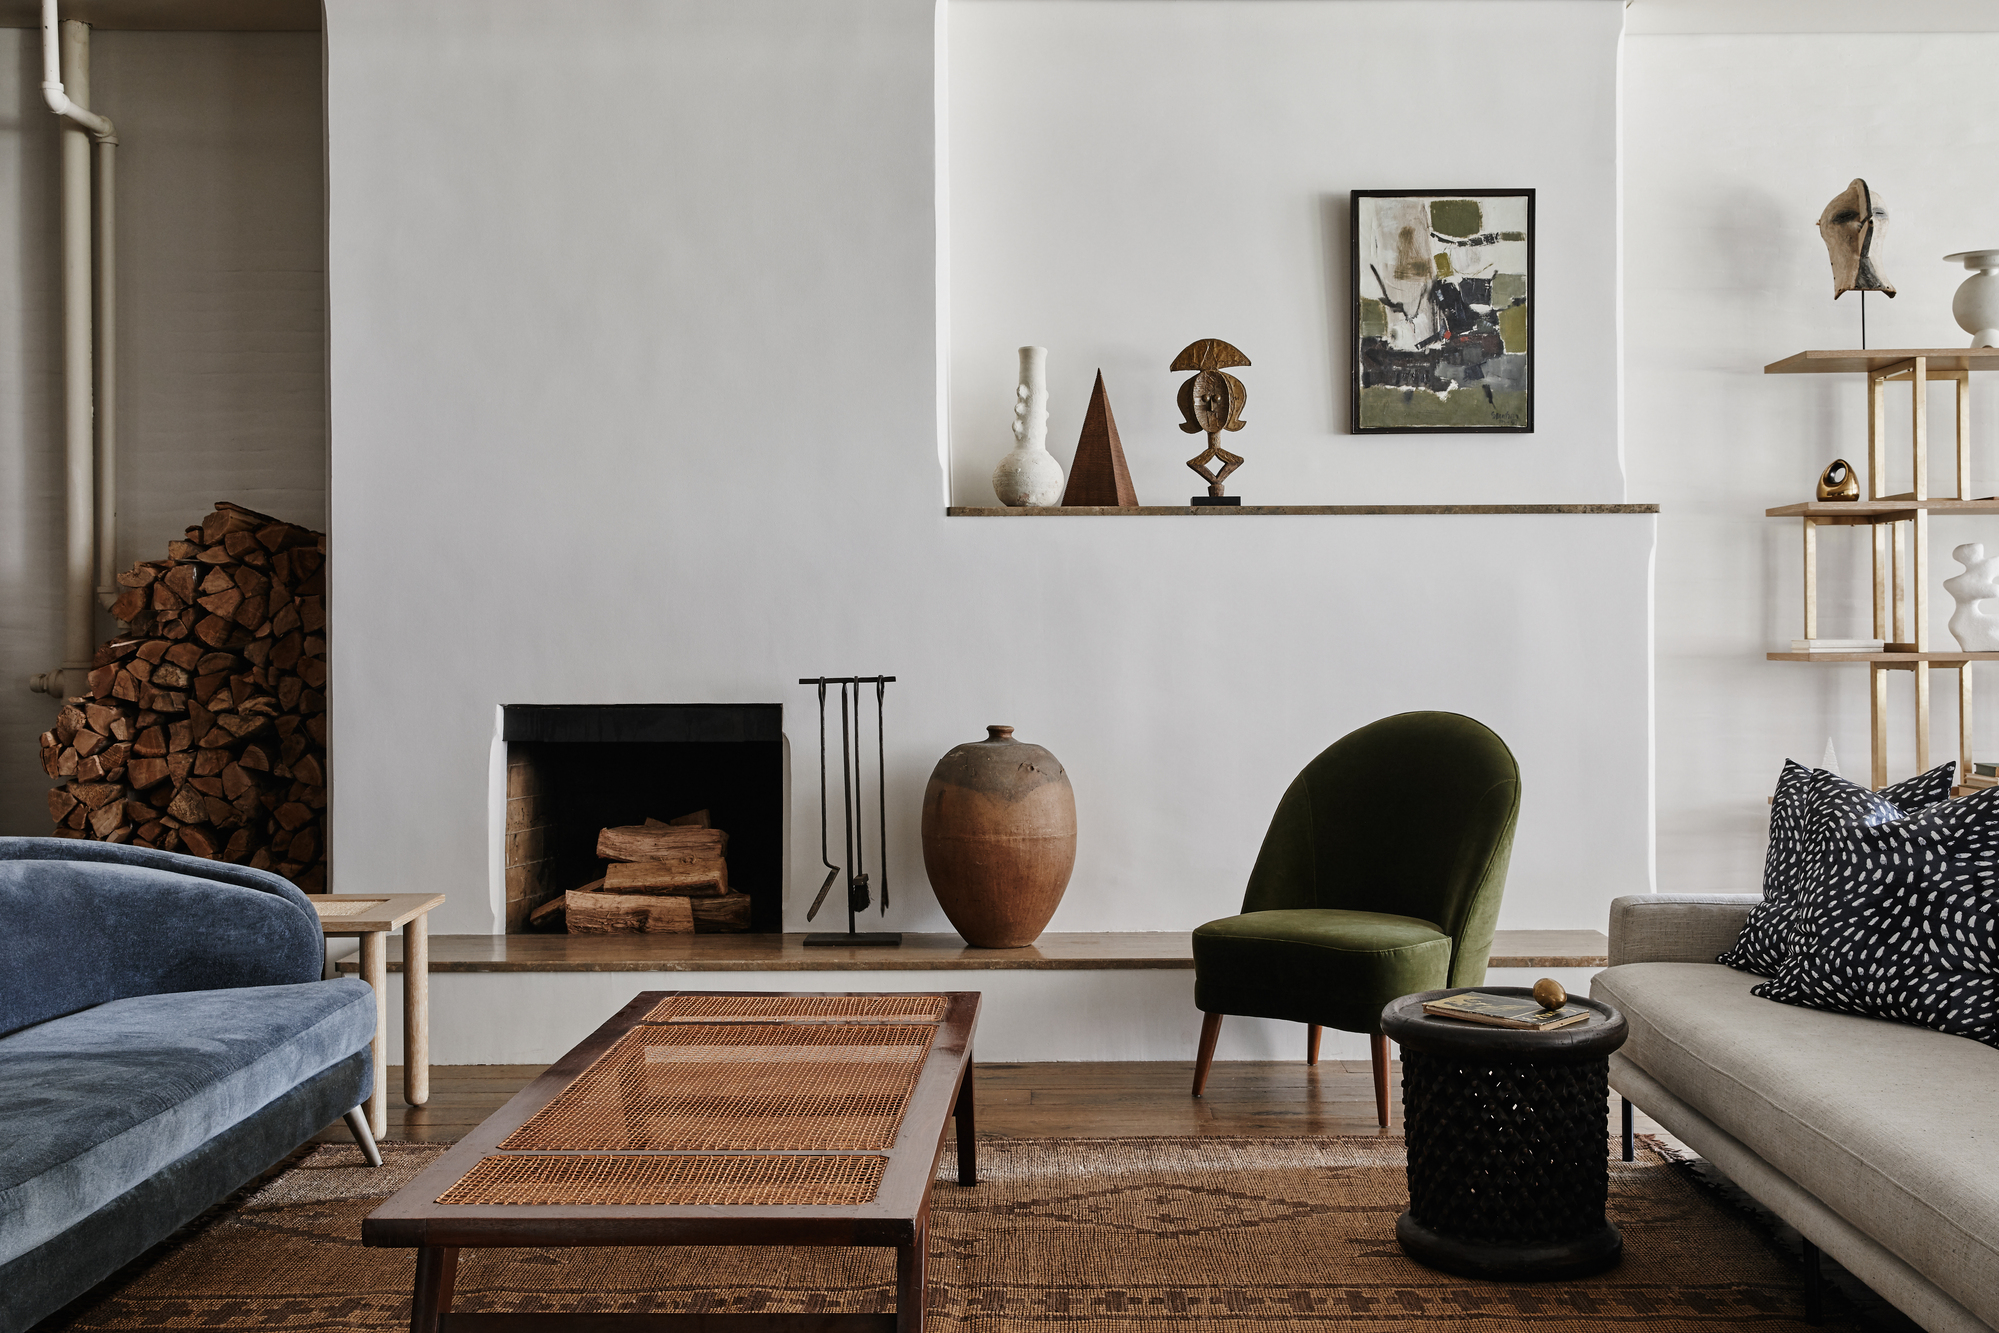 How do you decorate as a minimalist? Pared-back ideas to try